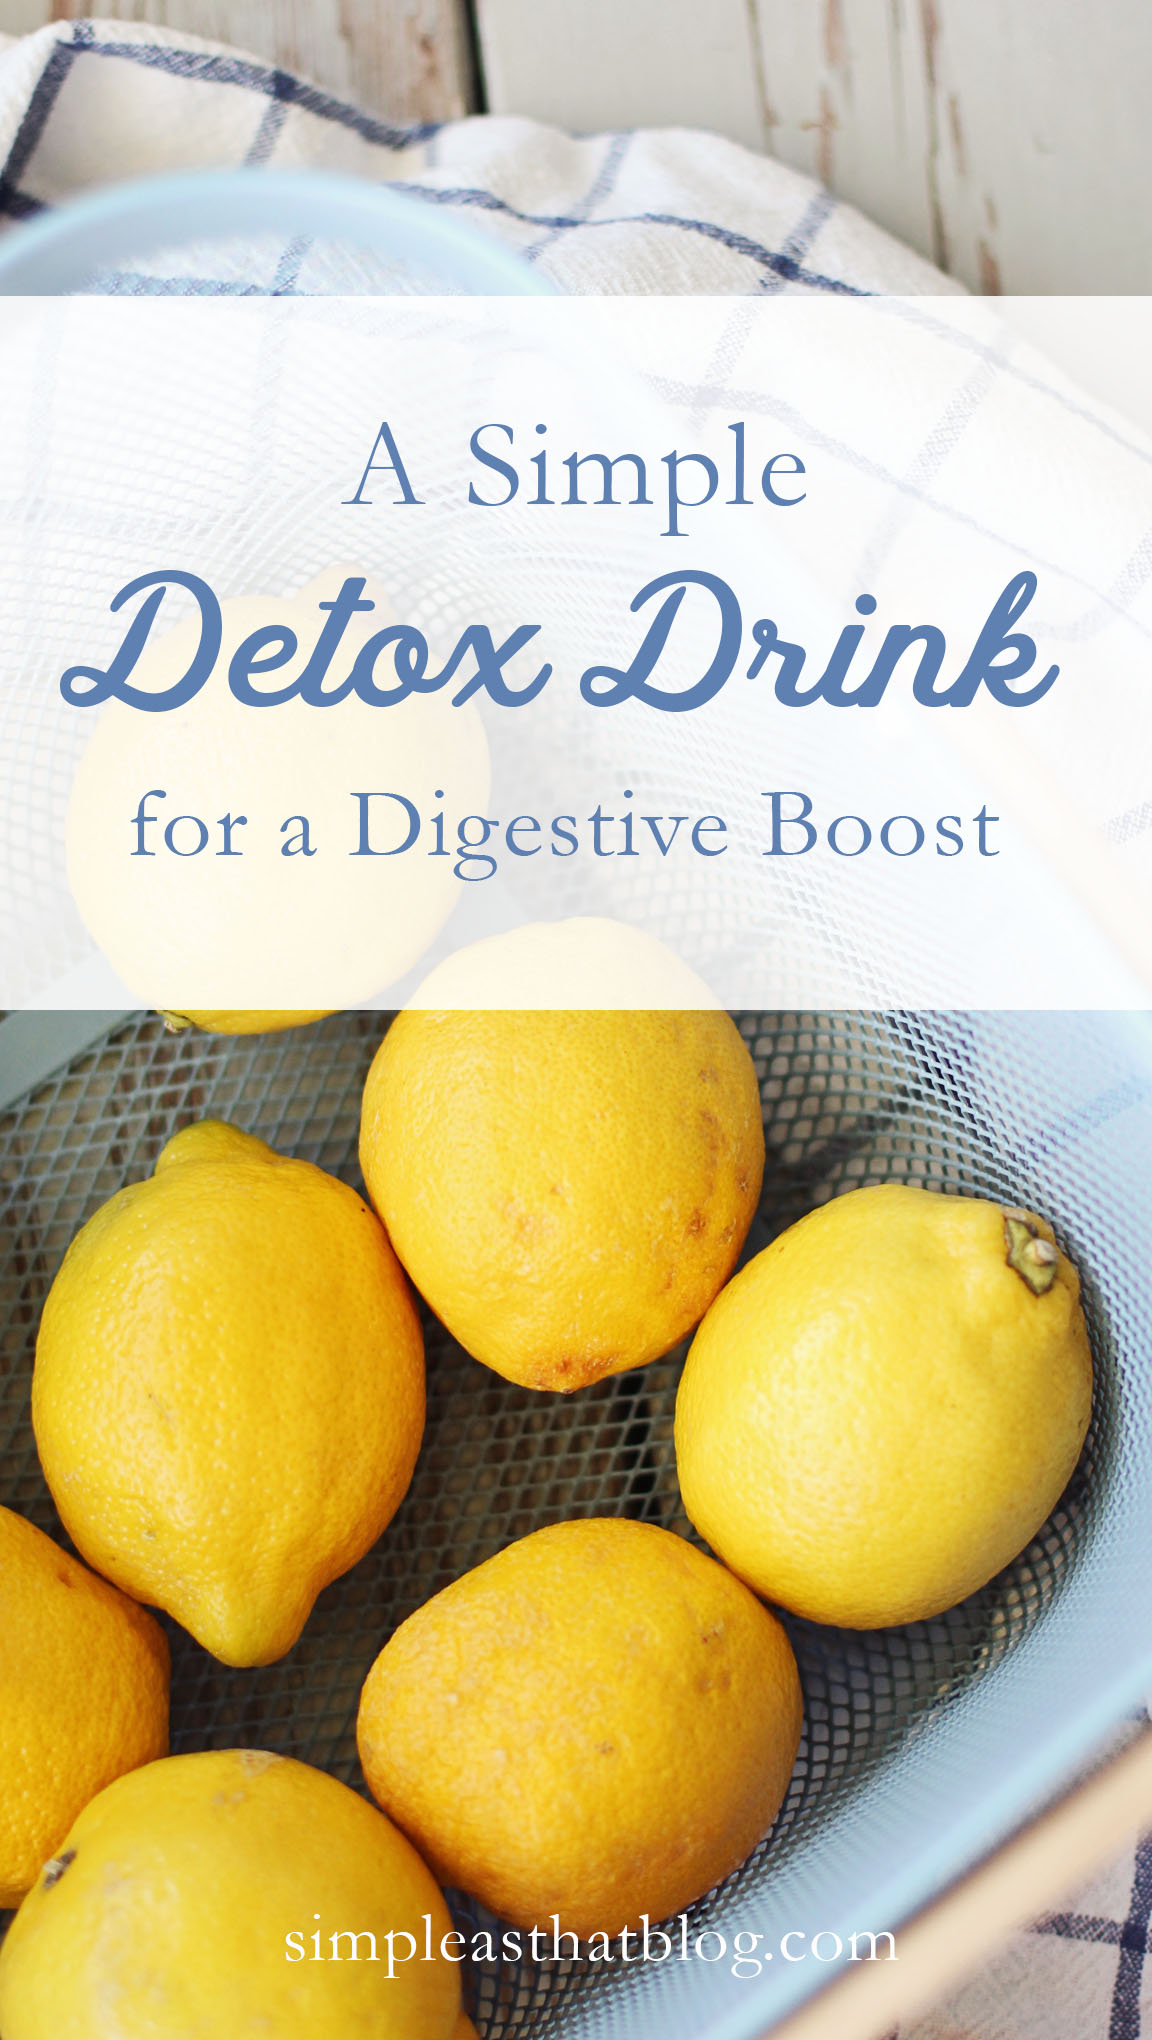 This daily detox drink will help your body cleanse naturally every single day, no starvation necessary.